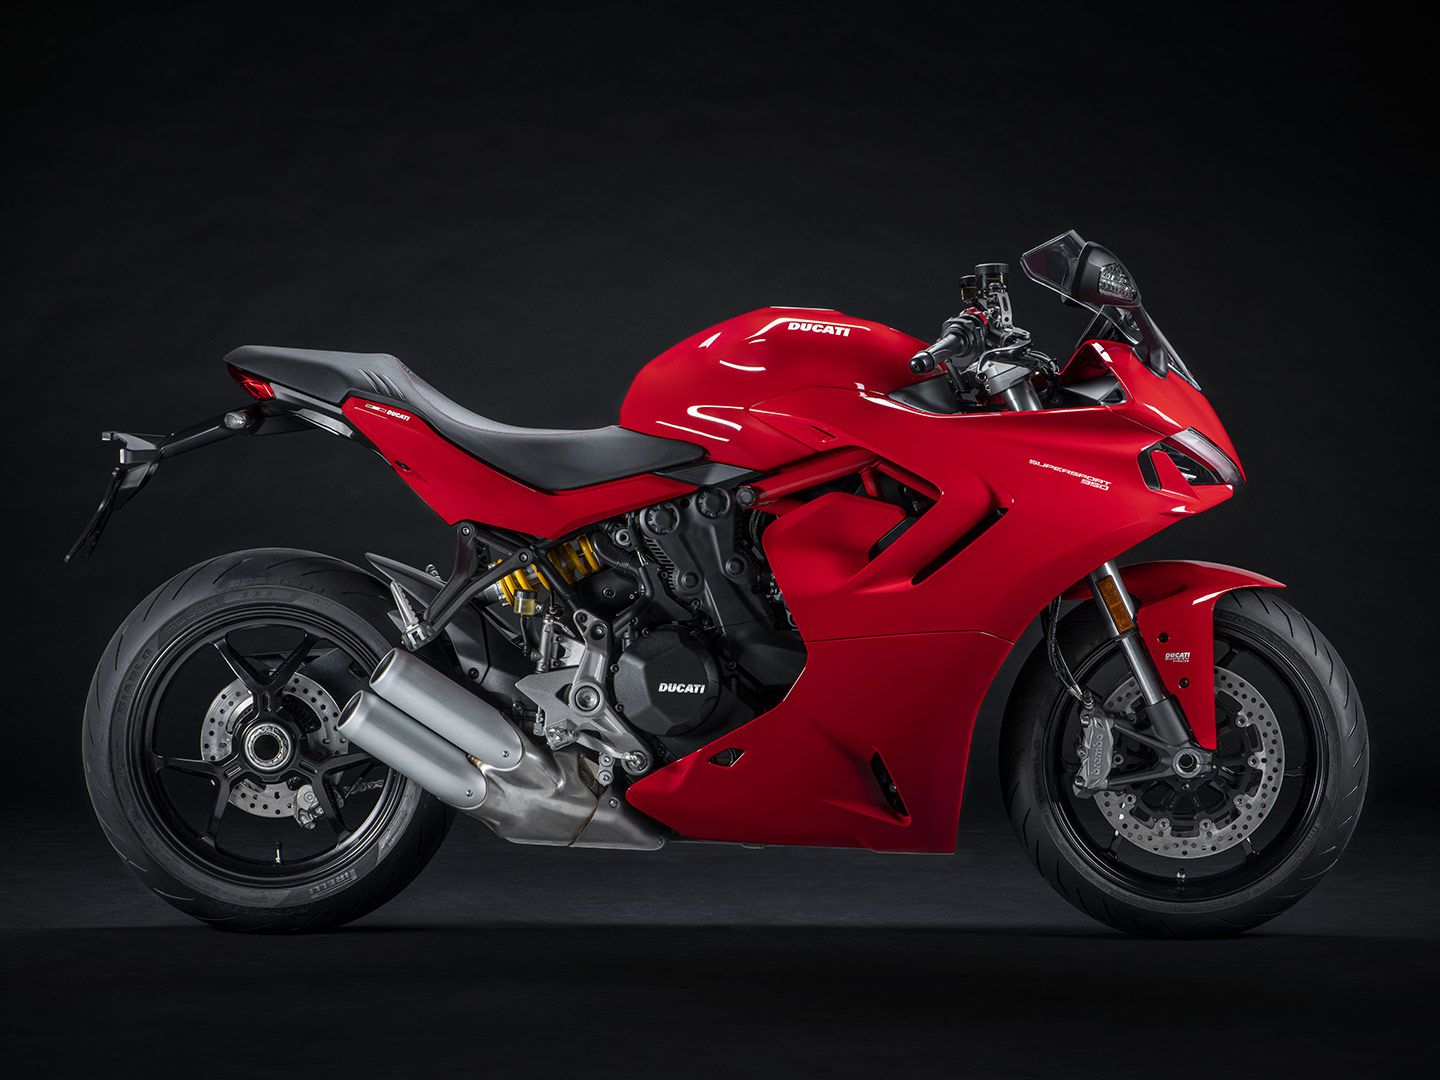 A sportbike for the real world. Ducati’s SuperSport 950 combines Panigale-esque looks with comfortable ergonomics.